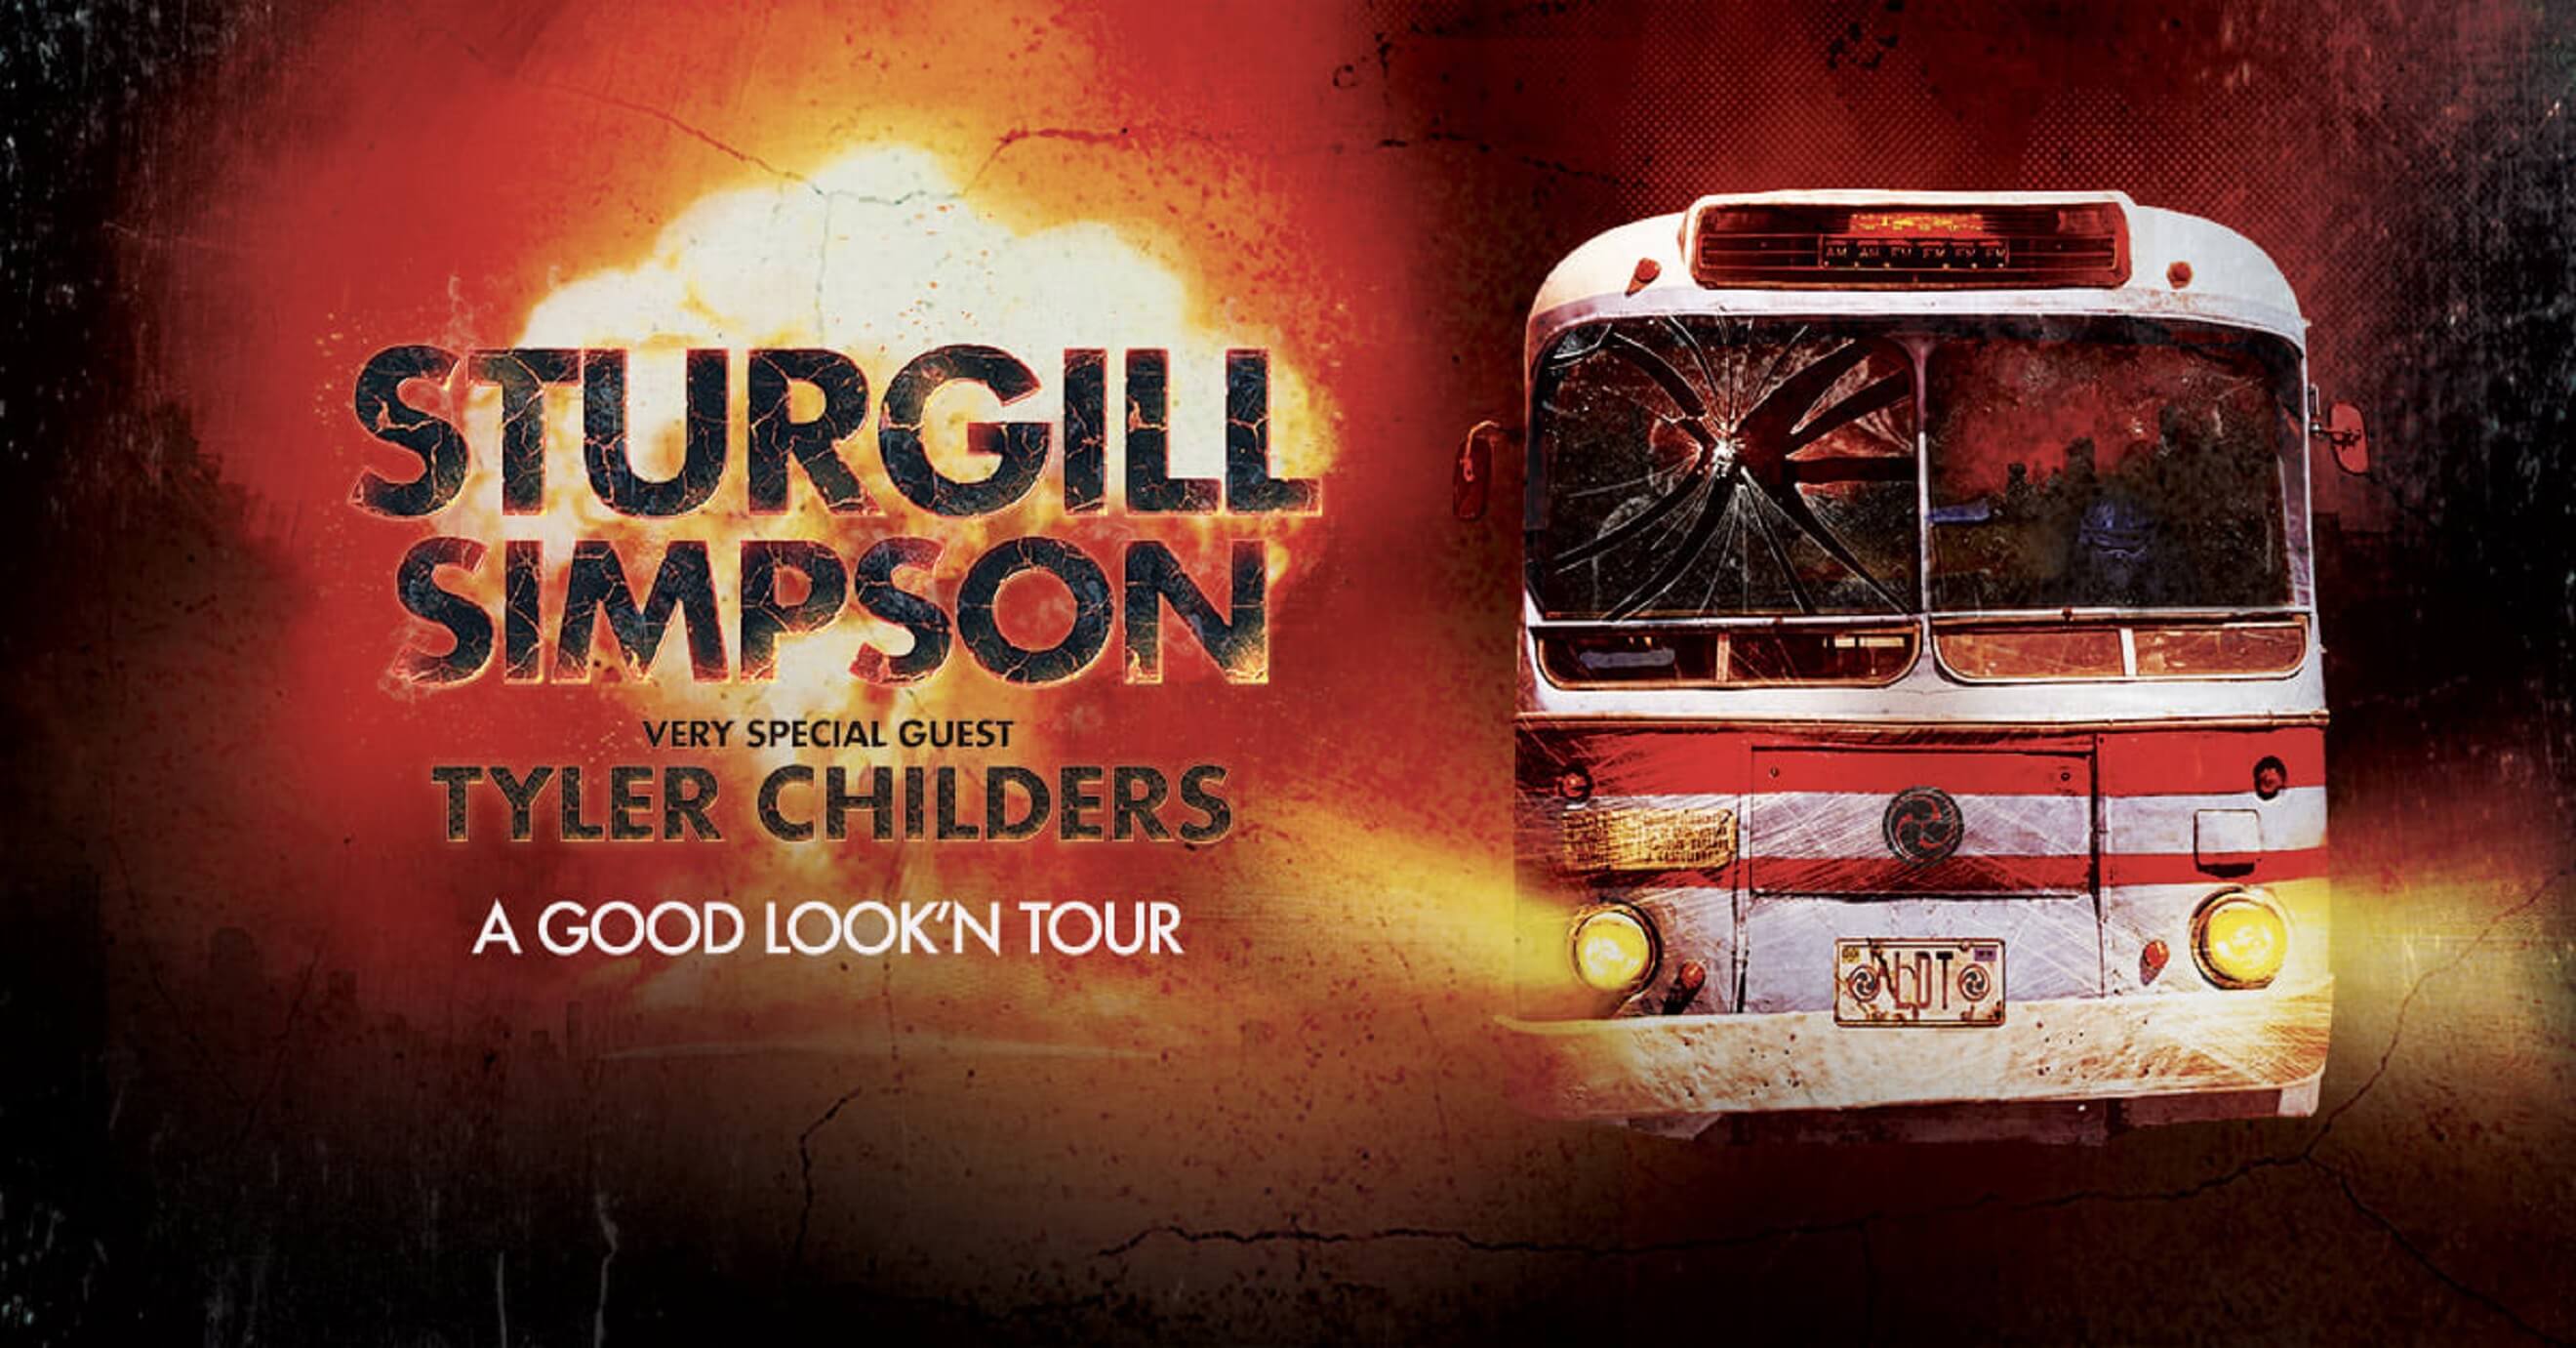 Sturgill Simpson & Tyler Childers Tour Announced KY Supply Co